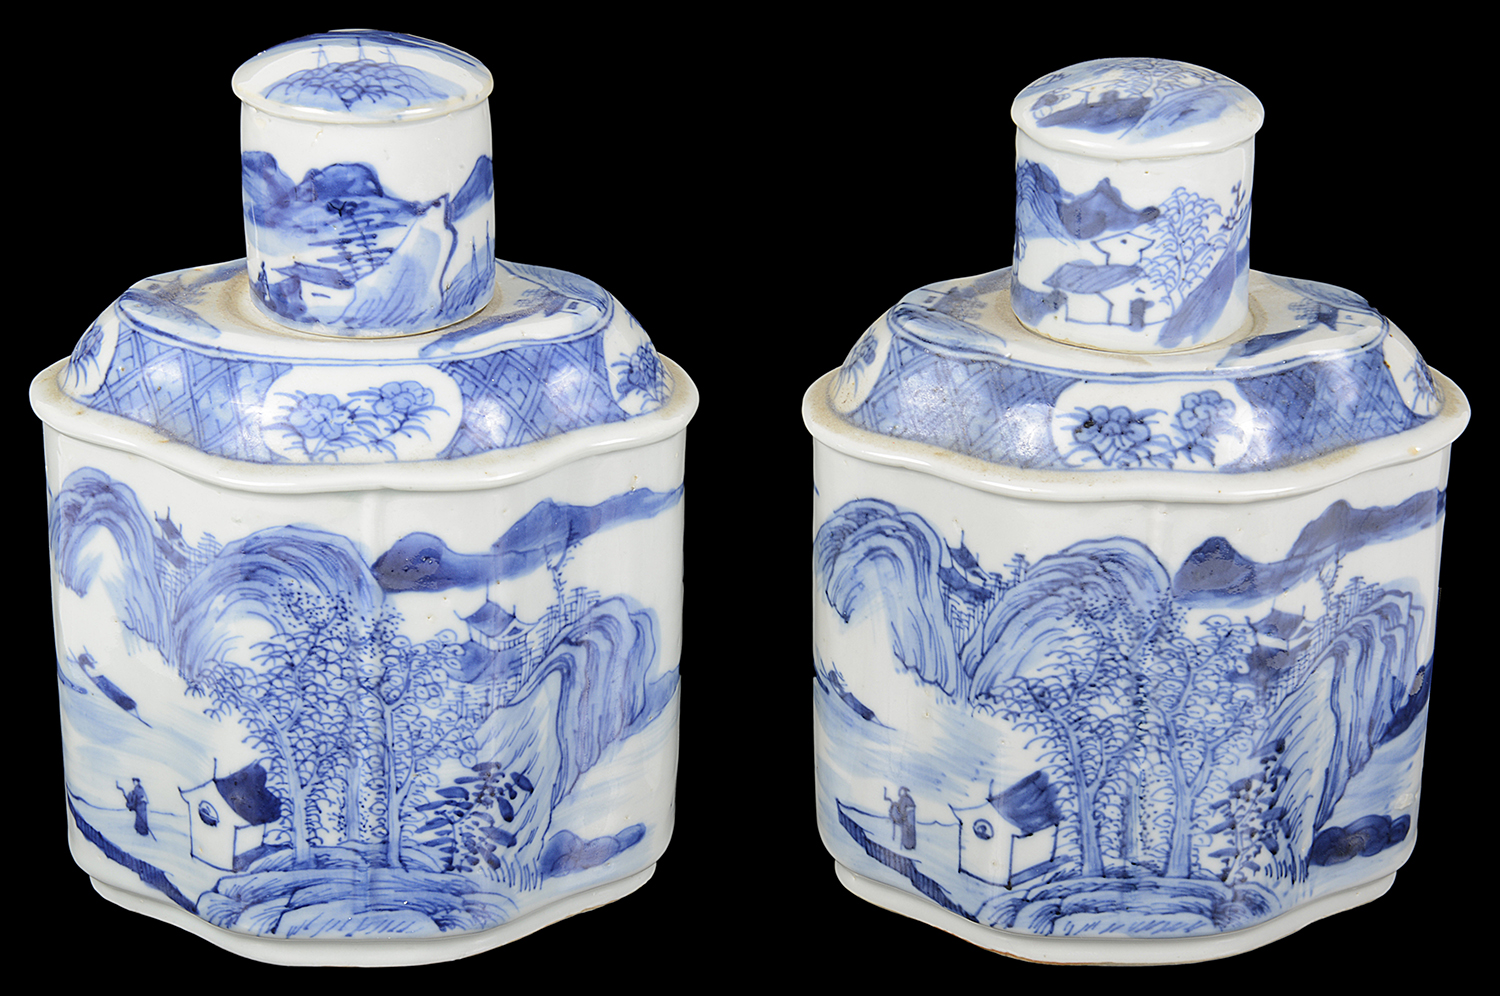 A pair of early 19th century large Chinese export ware blue and white tea poys and covers